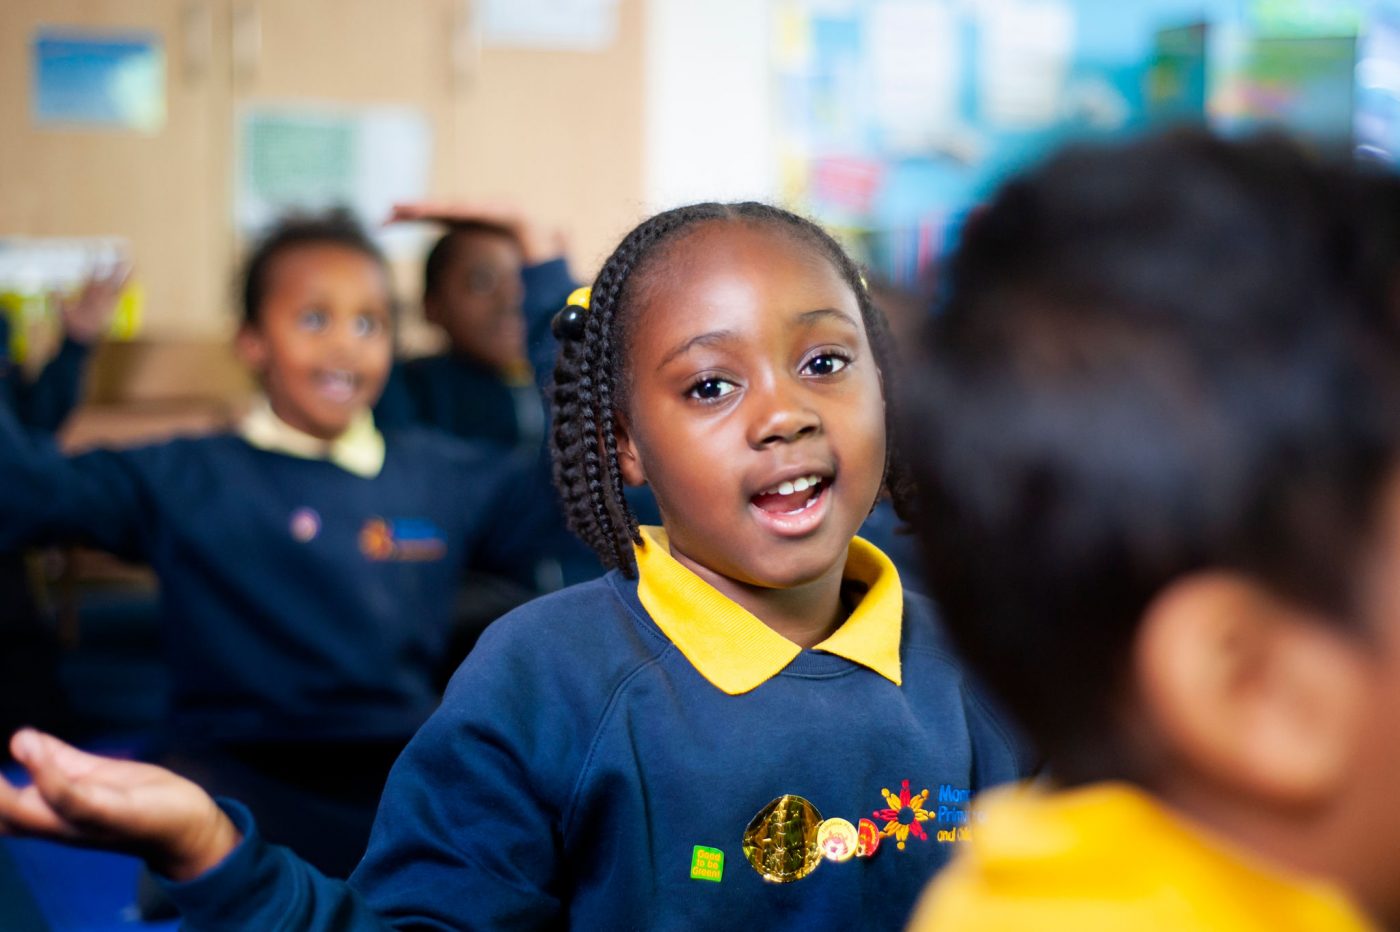 A young girl with braided hair and a bright expression participates enthusiastically in a classroom activity, wearing a navy and yellow school uniform adorned with colorful badges. Her peers, slightly out of focus, share in the lively educational experience, reflecting a vibrant and interactive learning environment.